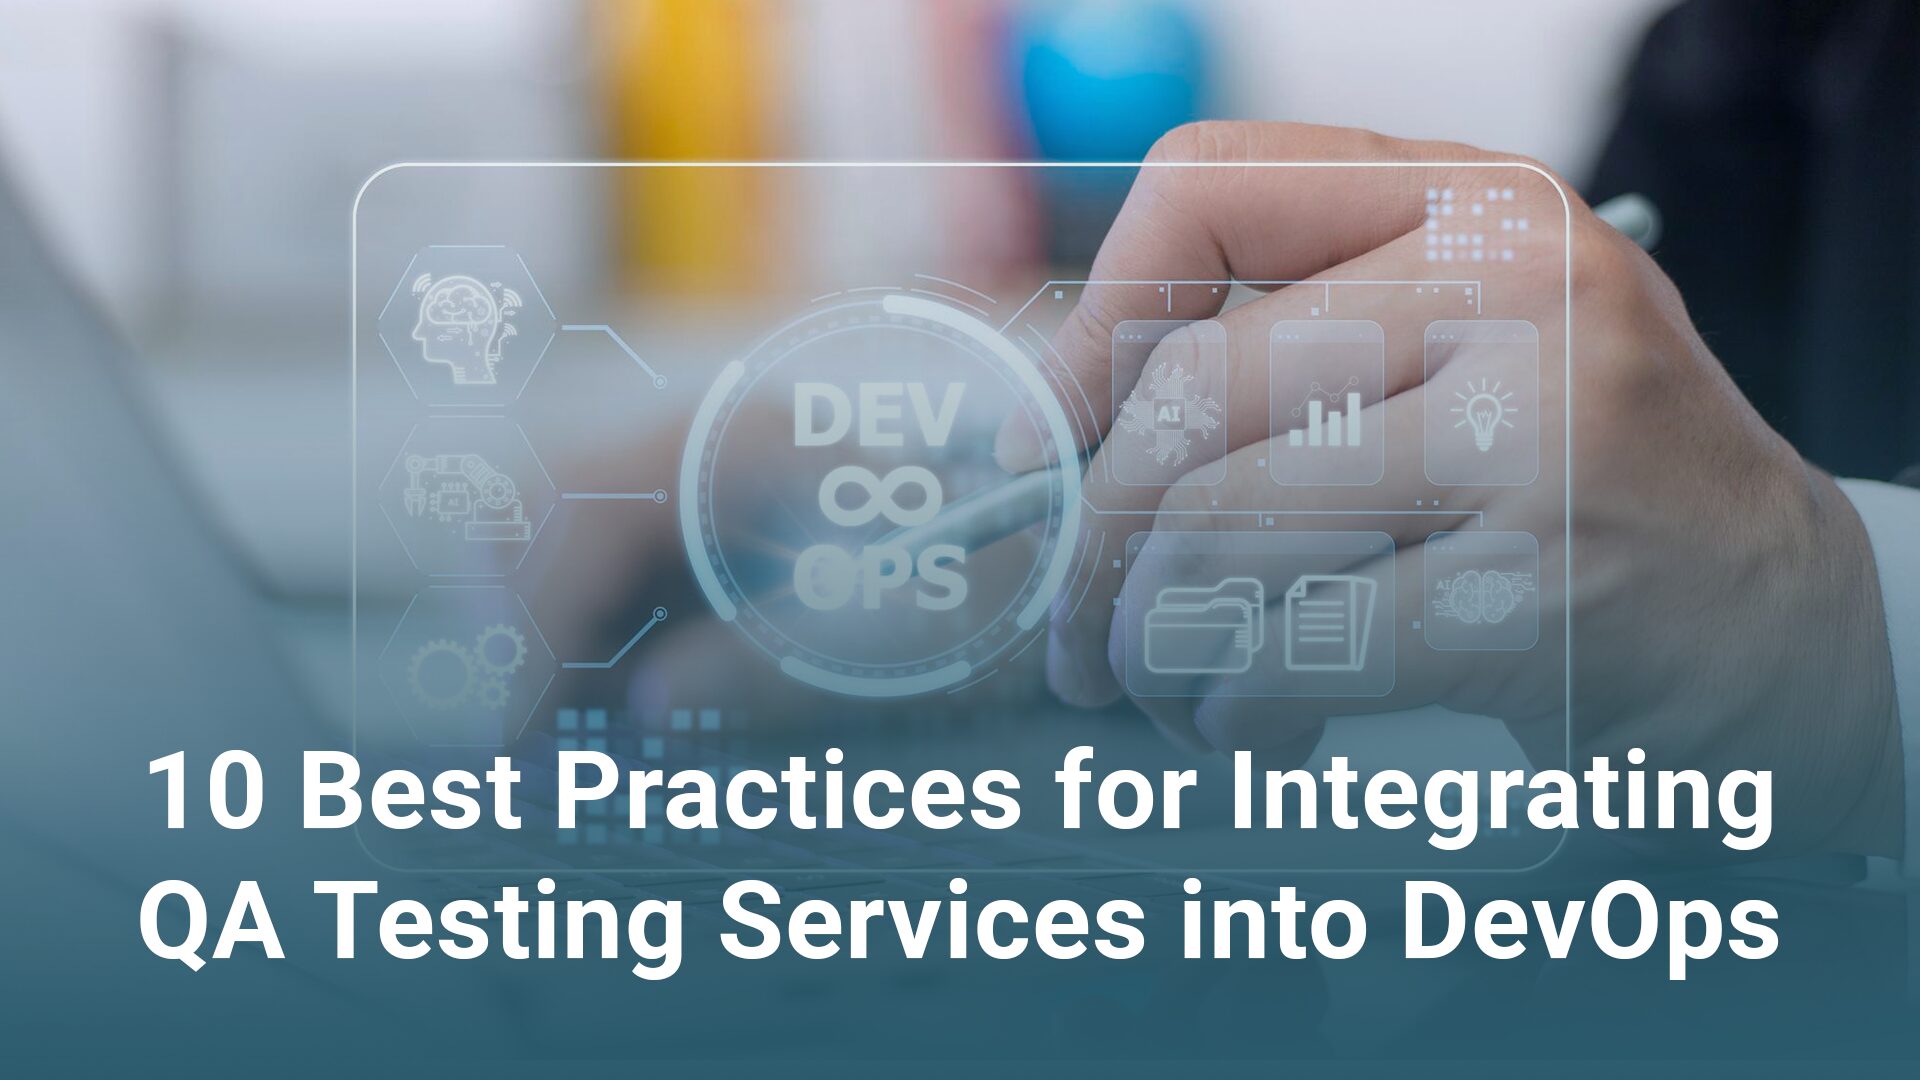 10 Best Practices for Integrating QA Testing Services into DevOps